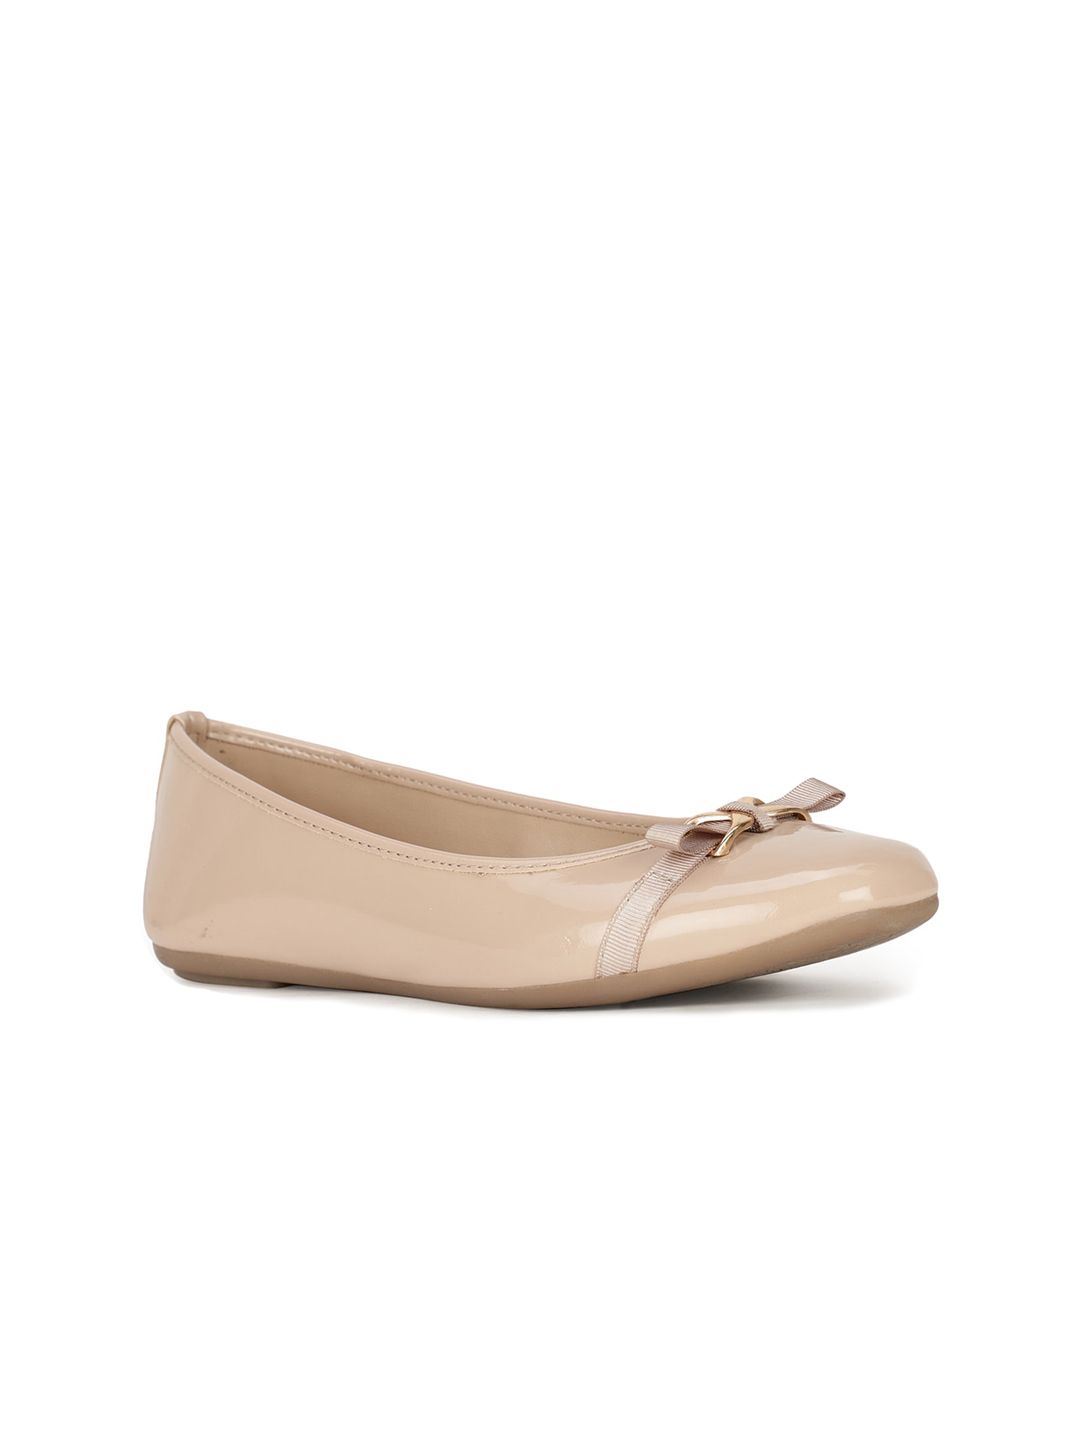 Bata Women Beige Ballerinas with Bows Flats Price in India